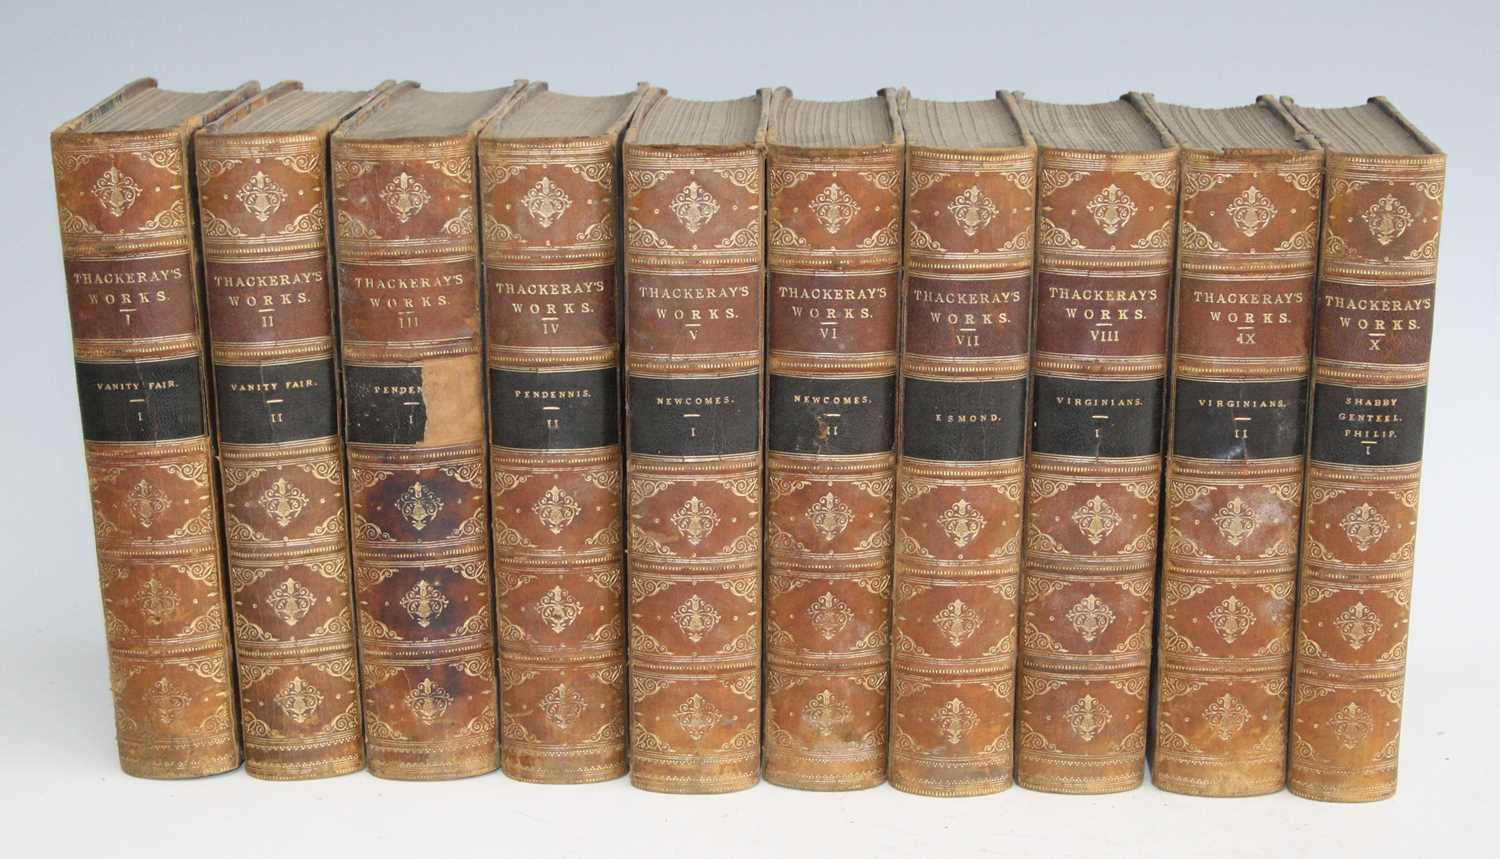 Thackeray, William Makepeace: The Works of William Makepeace Thackery, In Twenty-Two Volumes, Vanity